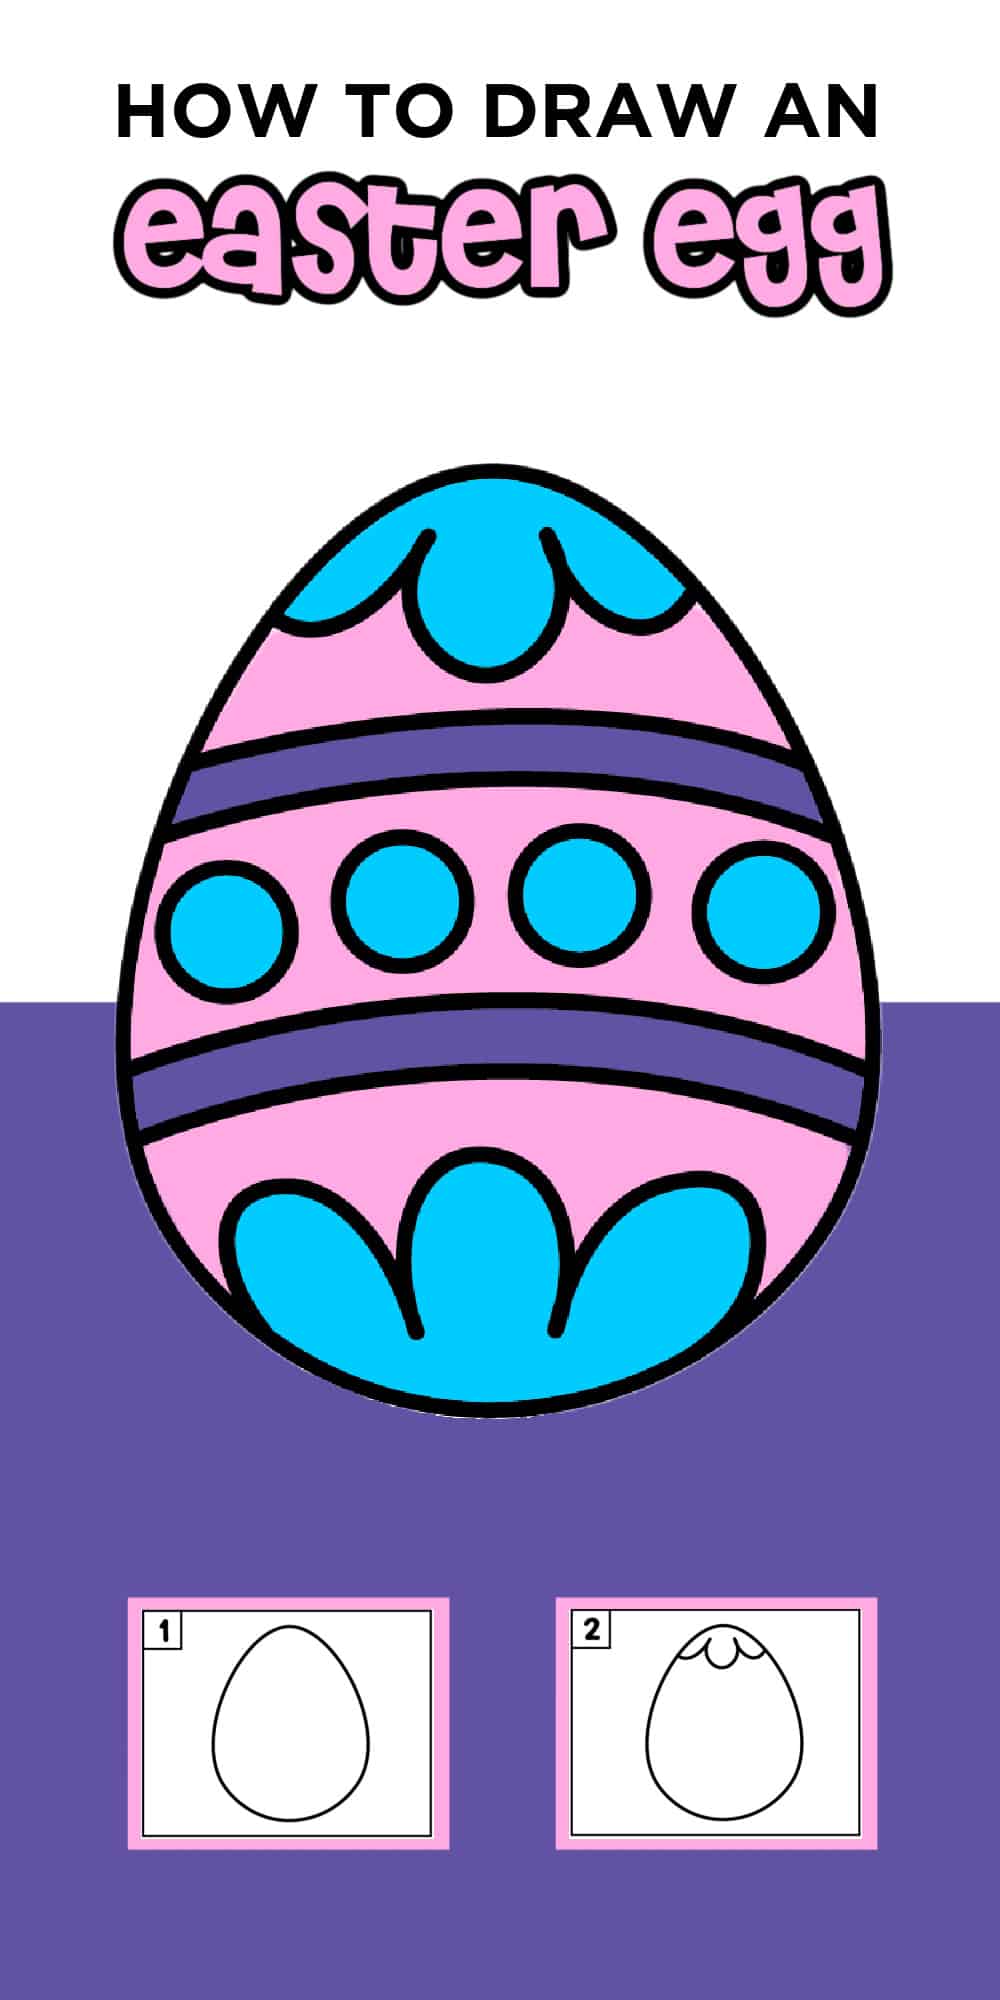 draw an easter egg